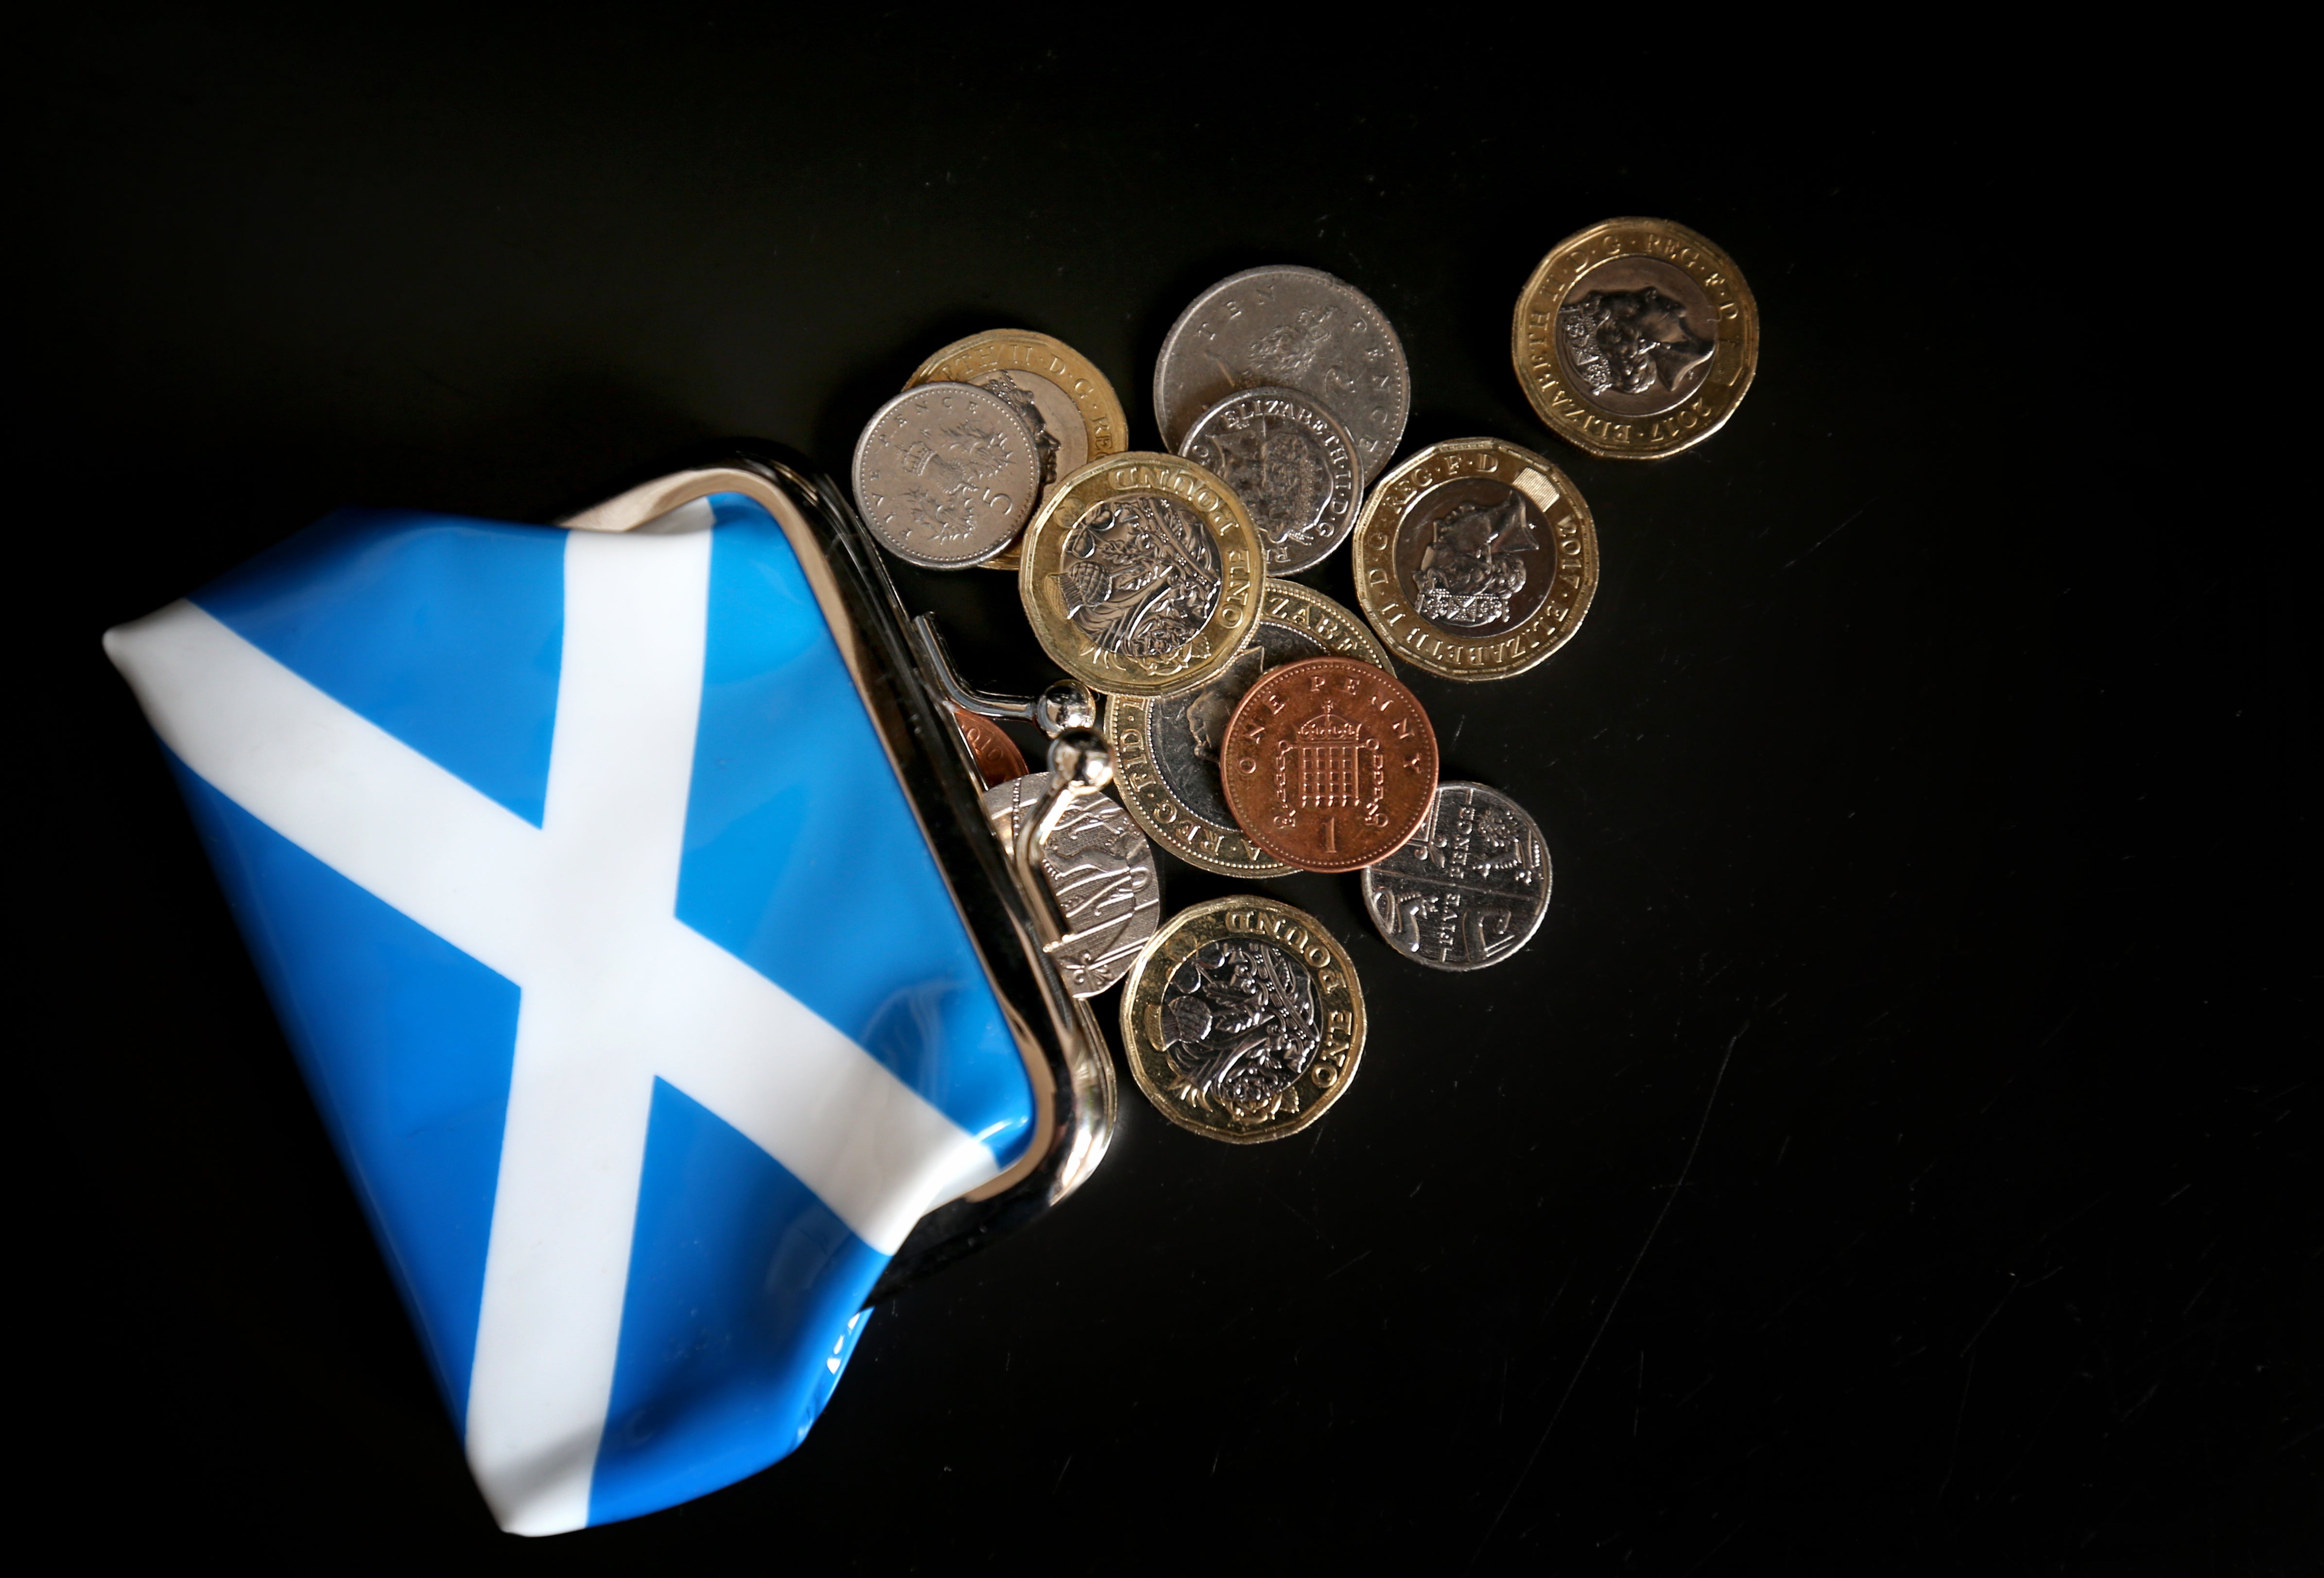 Scotland is facing an income tax shortfall at the same time as spending on social security is forecast to rise, the Scottish Fiscal Commission warned (Jane Barlow/PA)